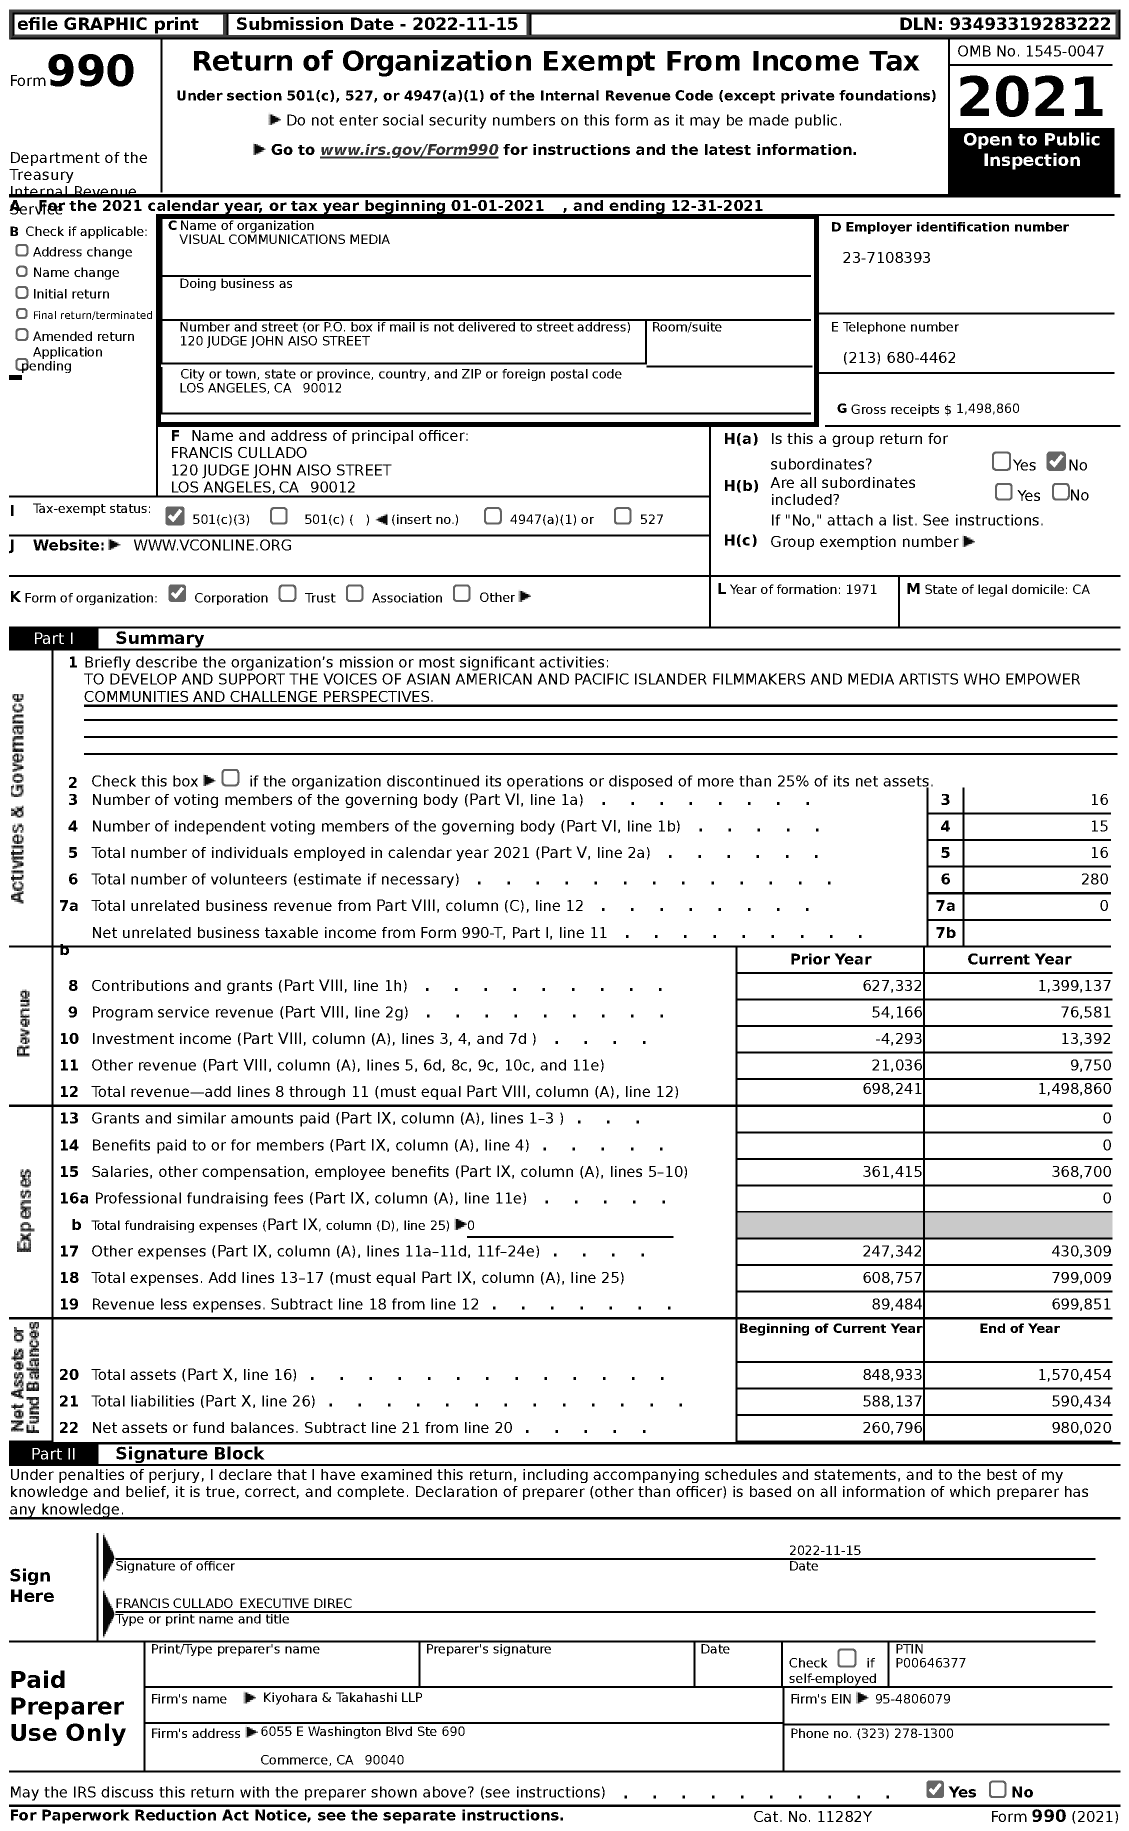 Image of first page of 2021 Form 990 for Visual Communications Media